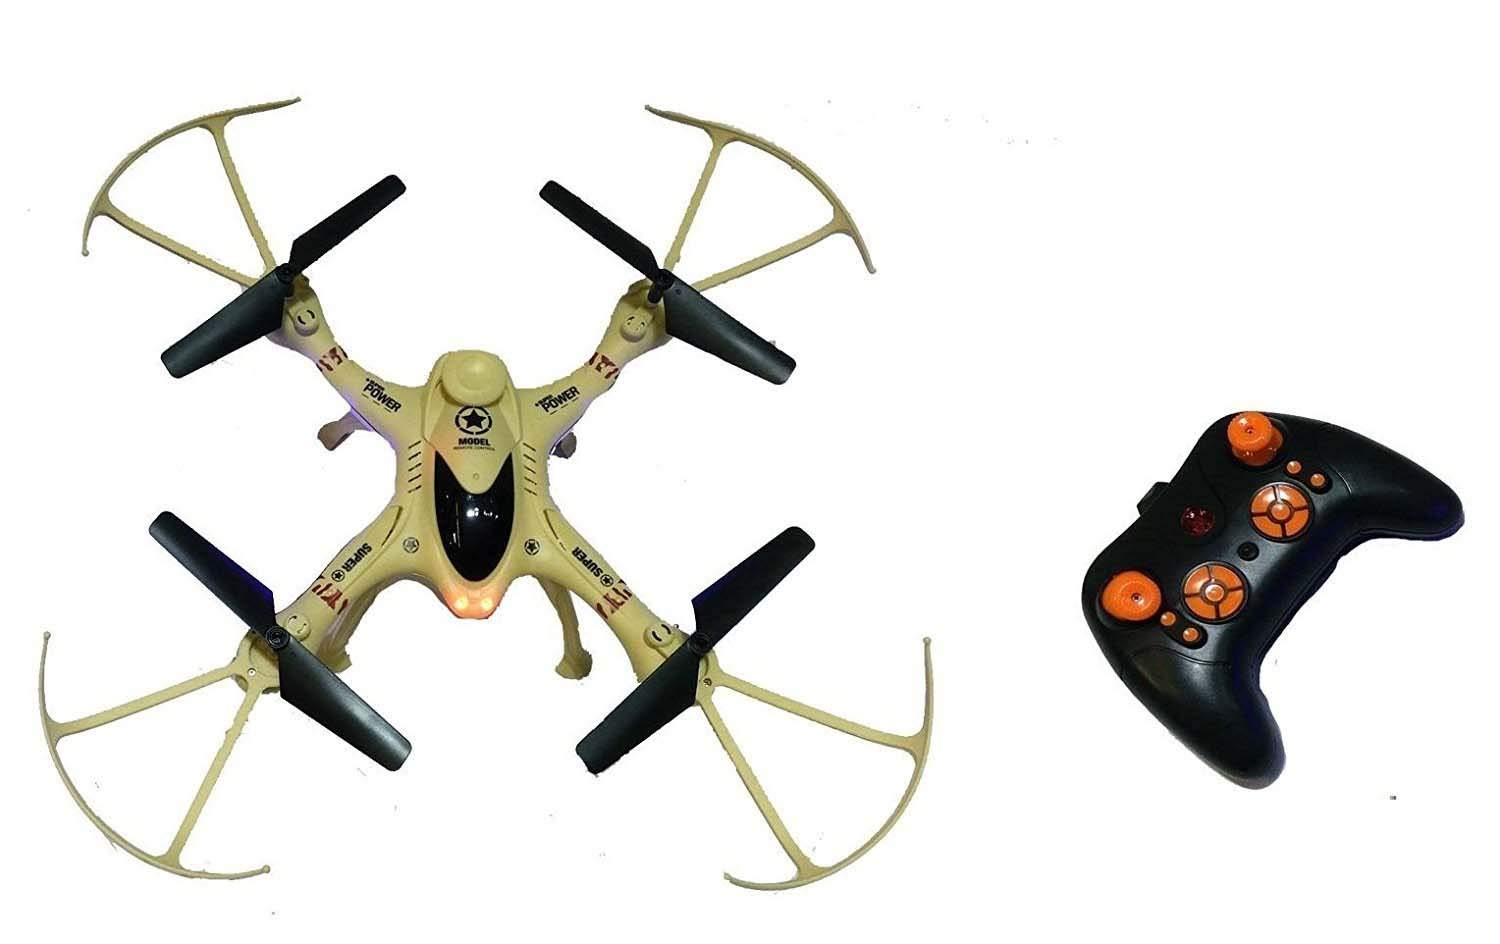 Toy Drone 6 Axis Gyro QY66-D1